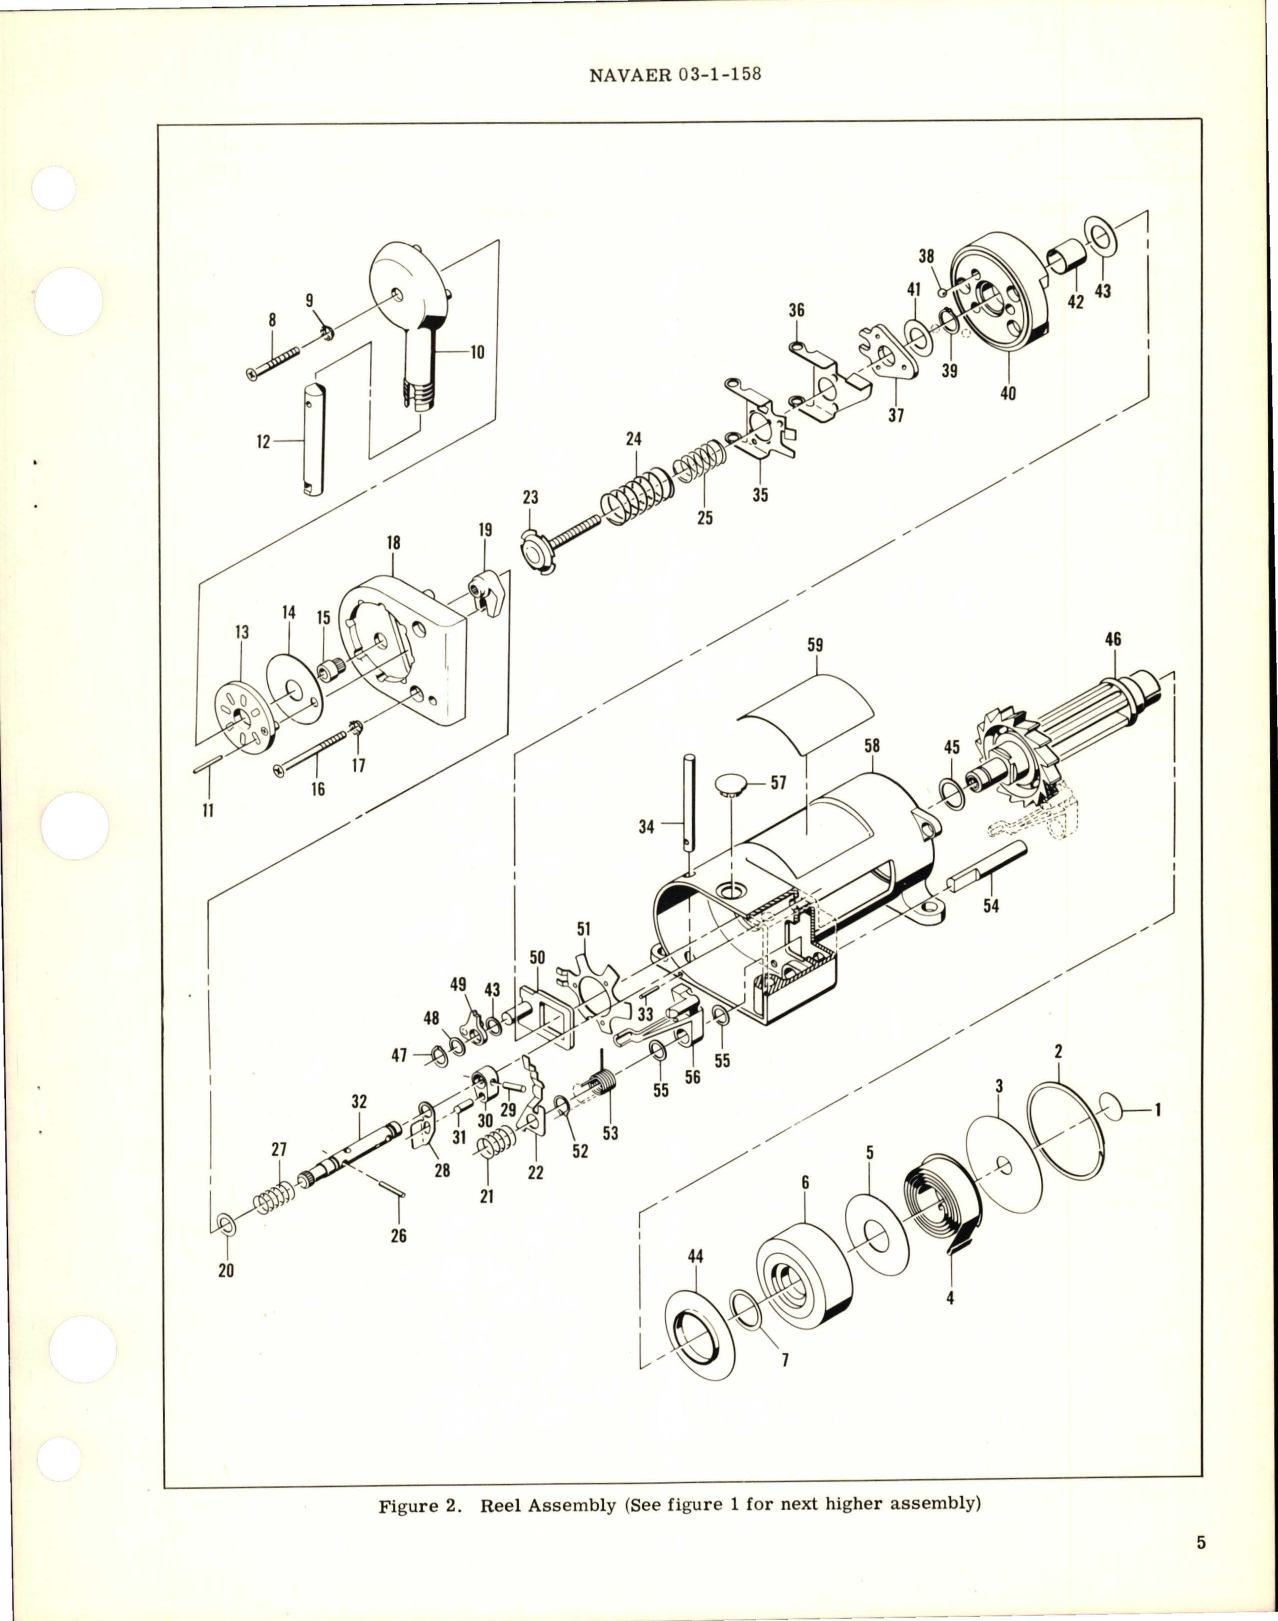 Sample page 5 from AirCorps Library document: Overhaul Instructions with Parts Breakdown for Shoulder Harness Take-Up Reel - Part 0101116-0